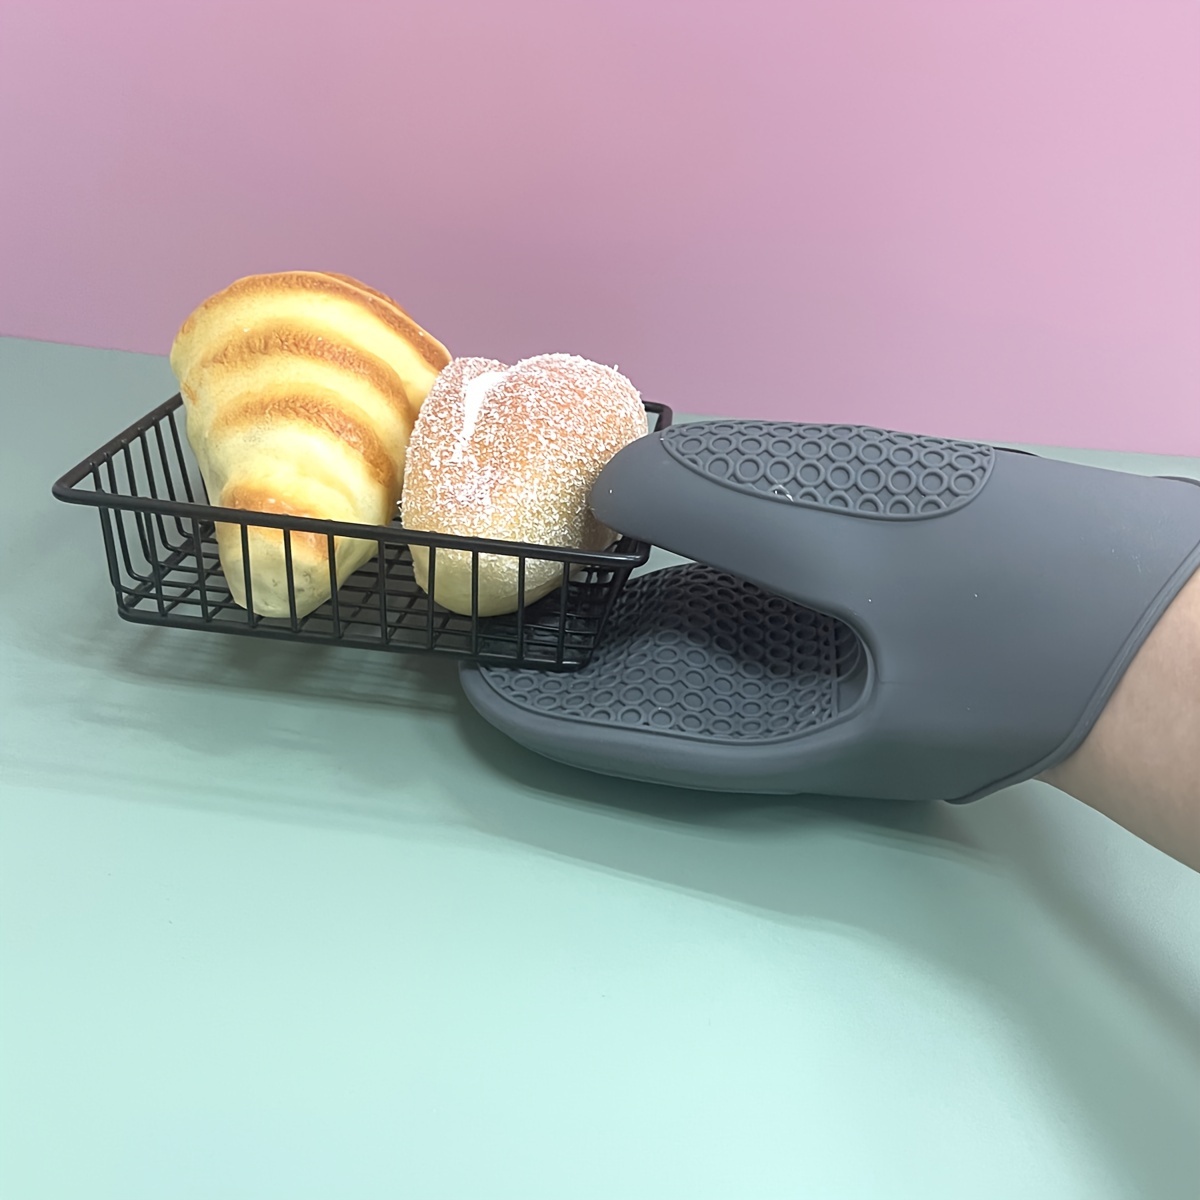 Pampered Chef Mini Oven Mitts